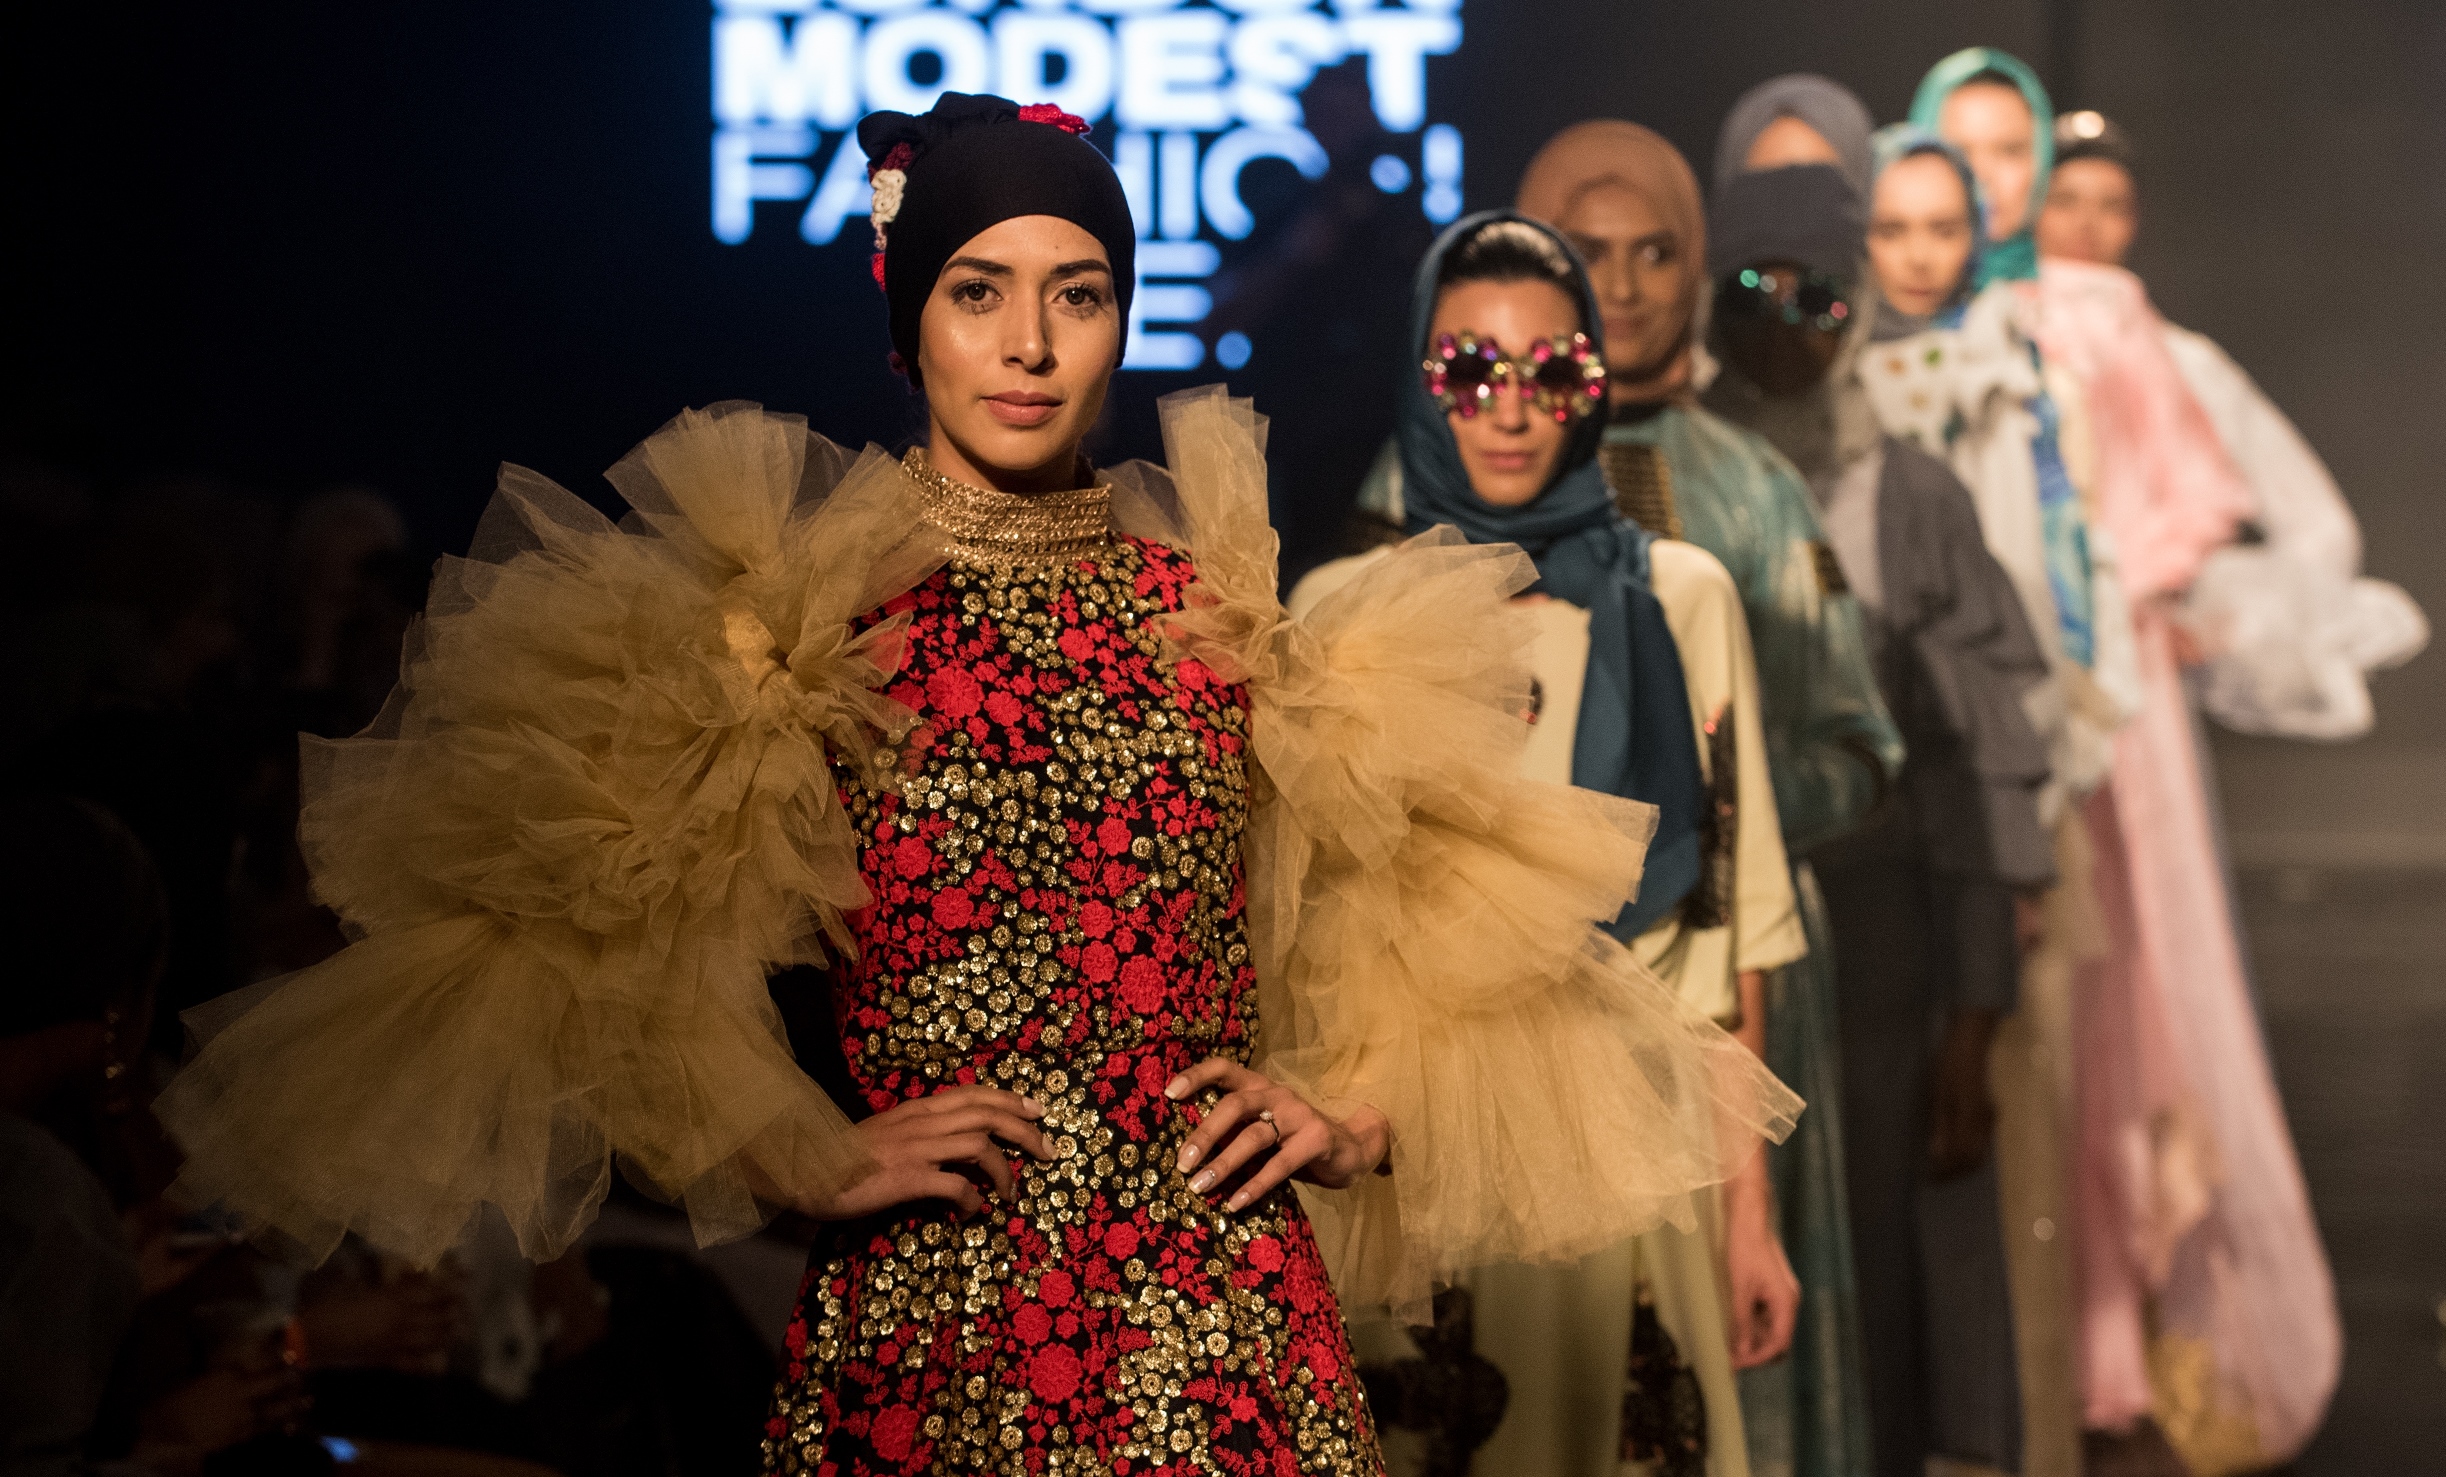 Modest wear is trendy and not just about covering up, says Malaysian  designers